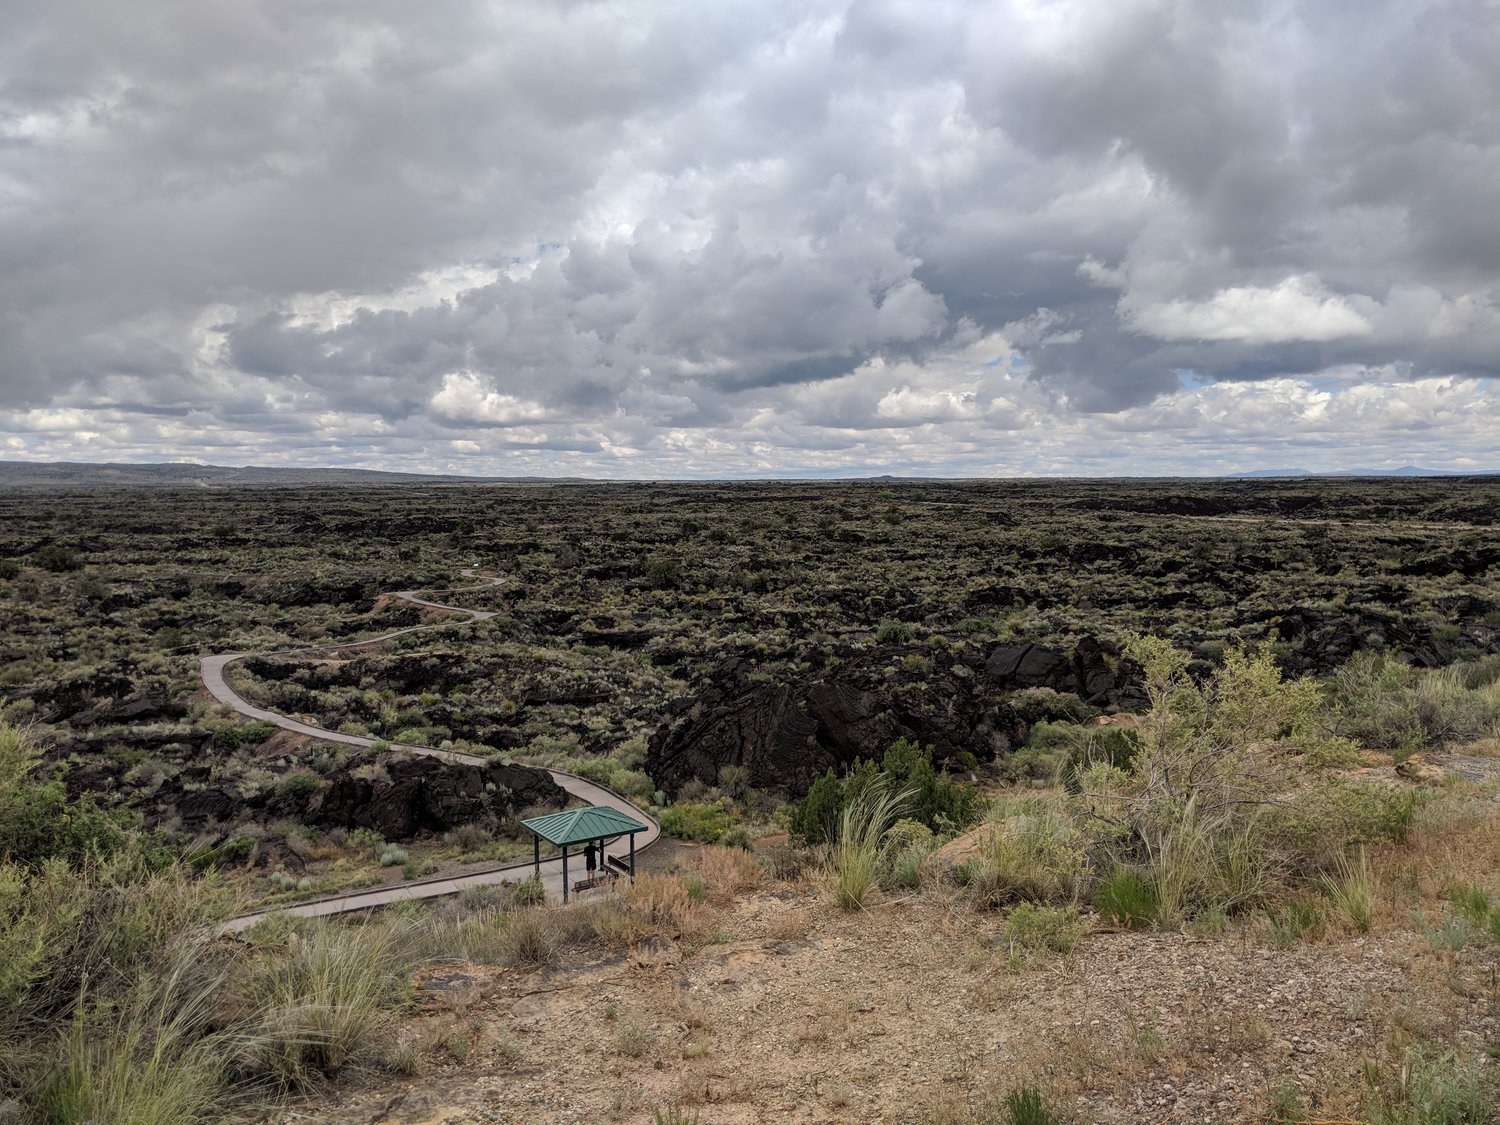 A fully accessible paved trail provides easy access to the lava field at Valley of the Fires. (